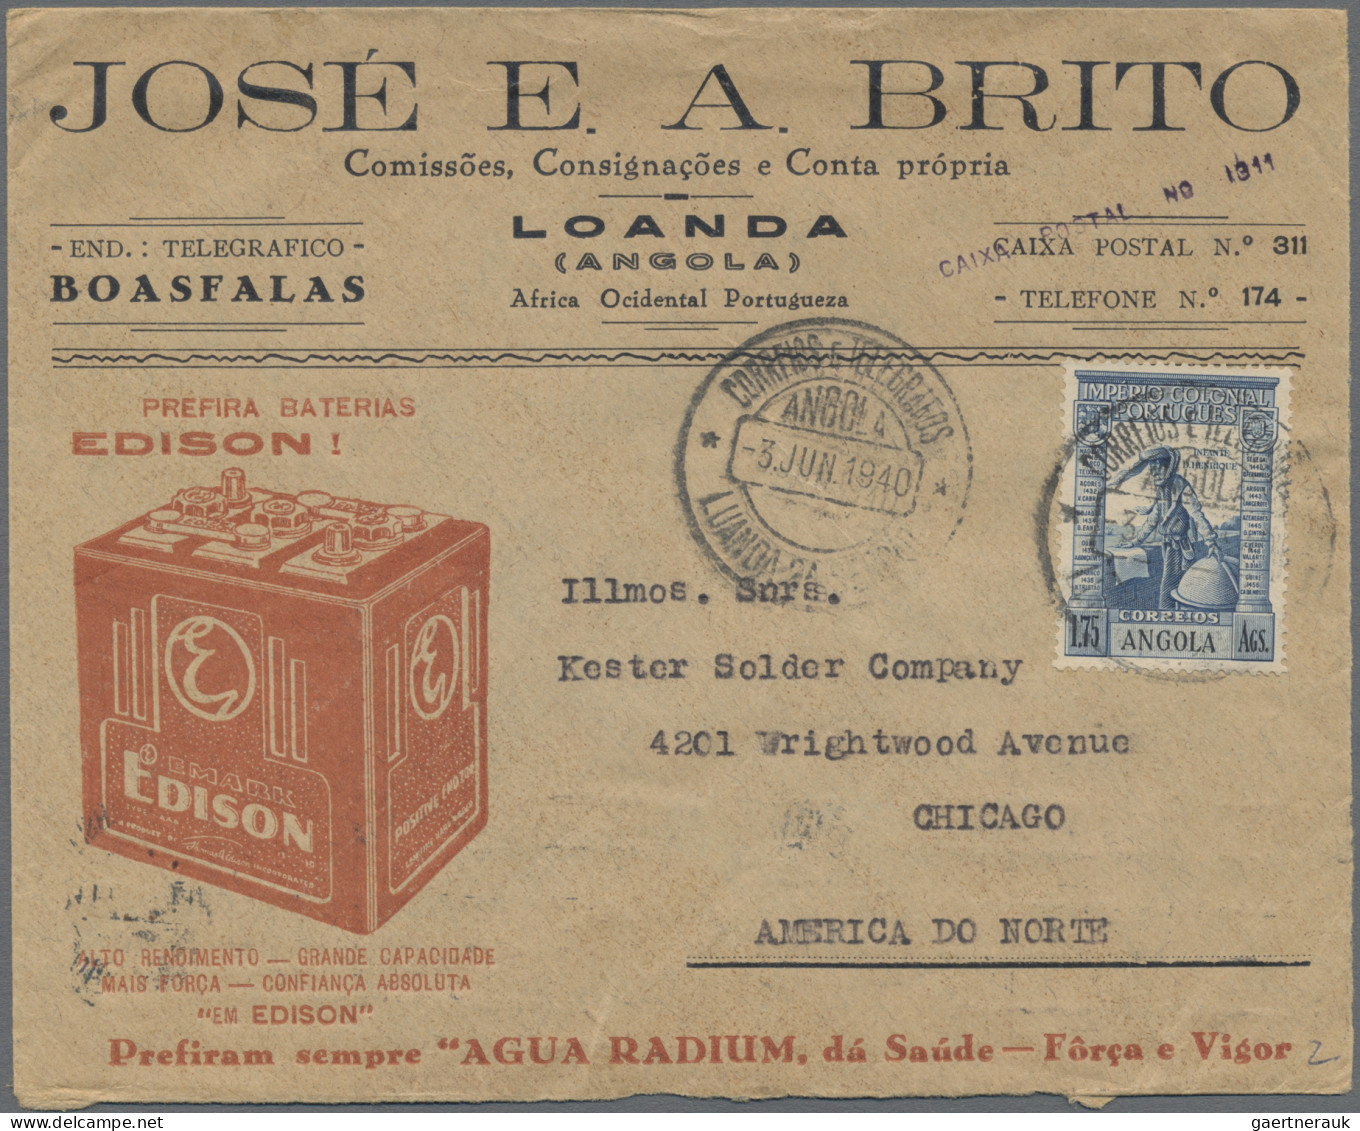 Angola: 1900/2005 (ca.), balance of apprx. 800-1.000 covers/cards incl. ppc, als